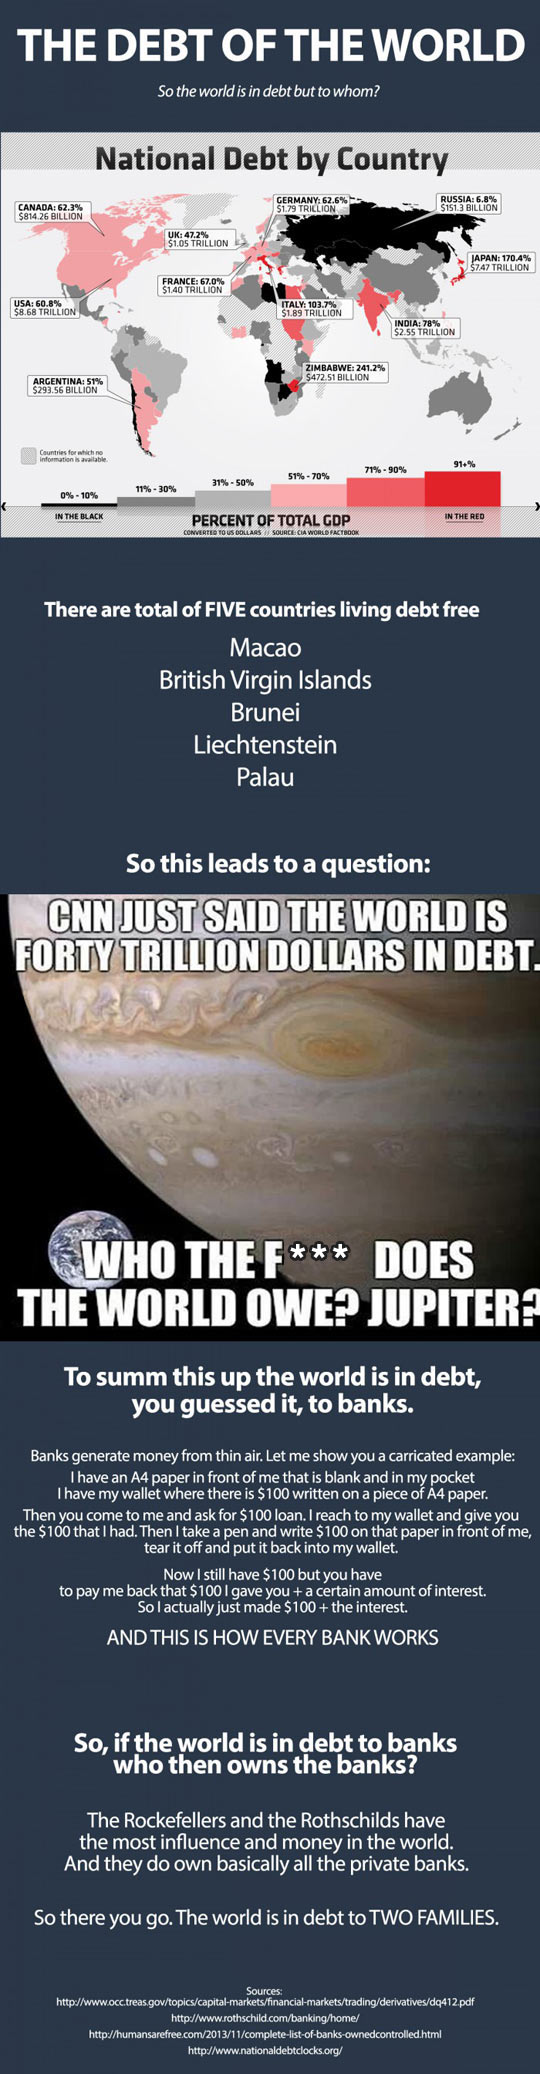 So Who Is The World In Debt To?